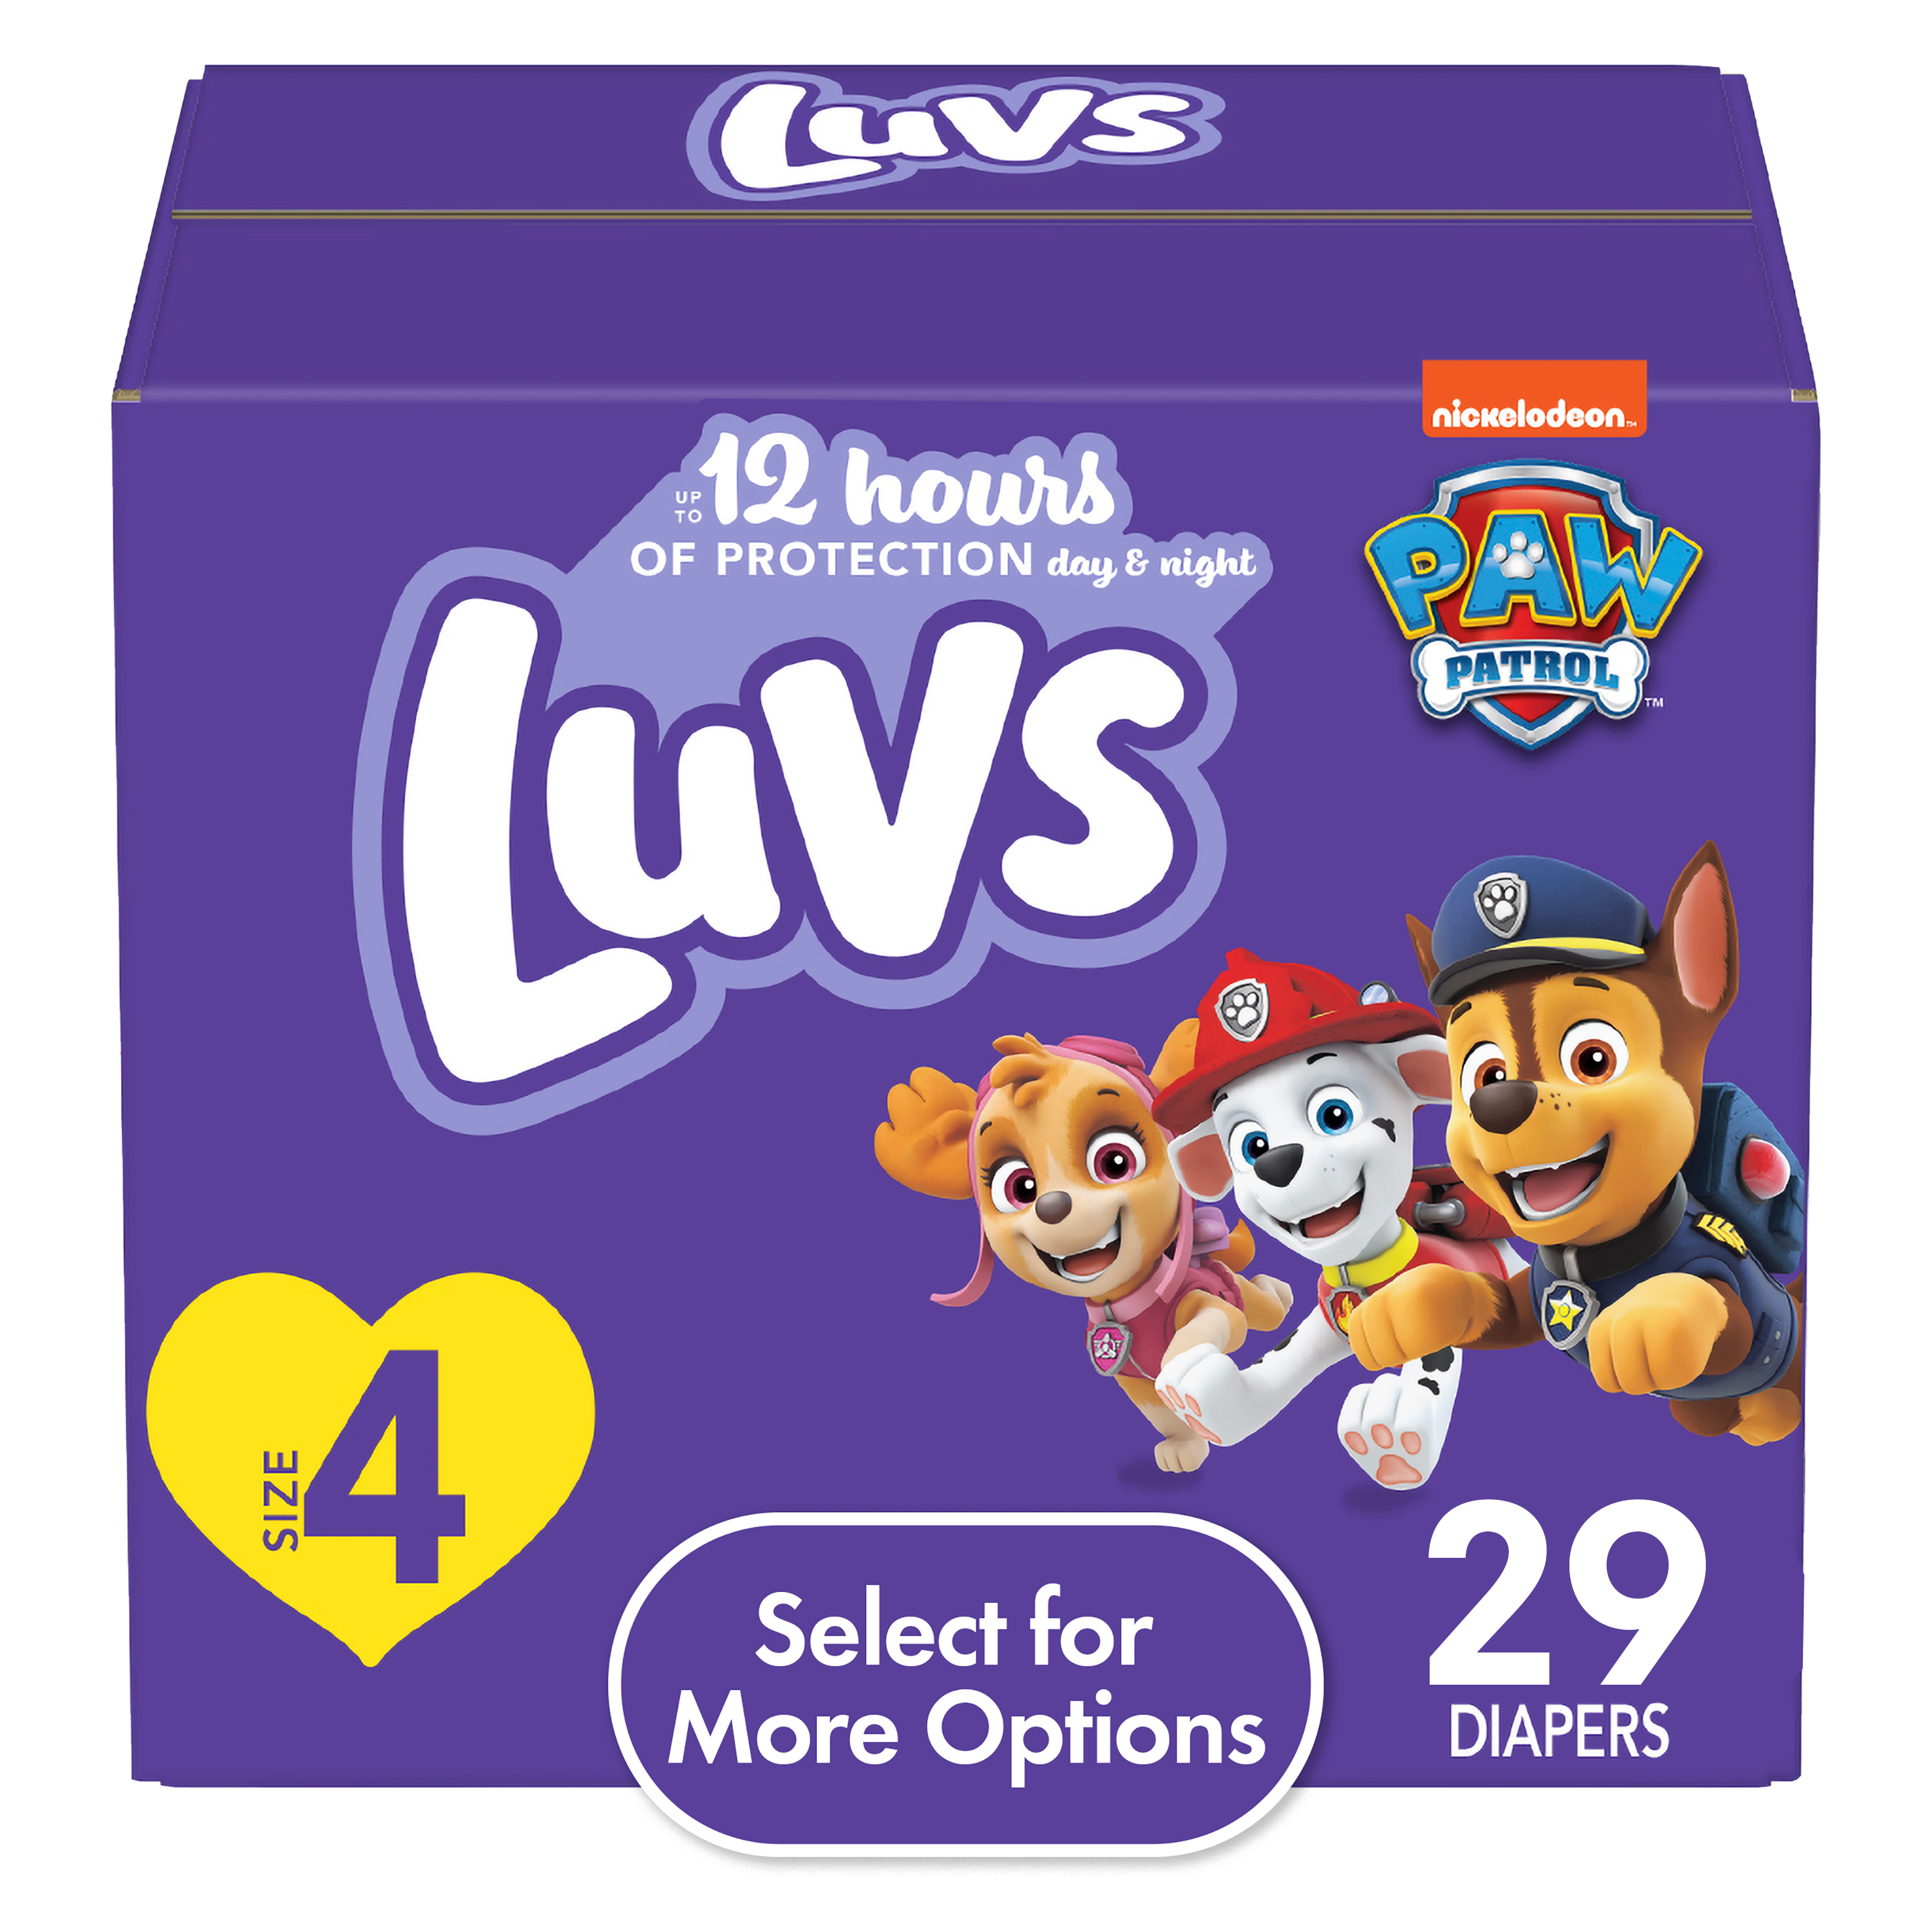 Luvs Diapers - Size 4, 29 Count, Paw Patrol Disposable Baby Diapers (Select for More Options) - image 1 of 10